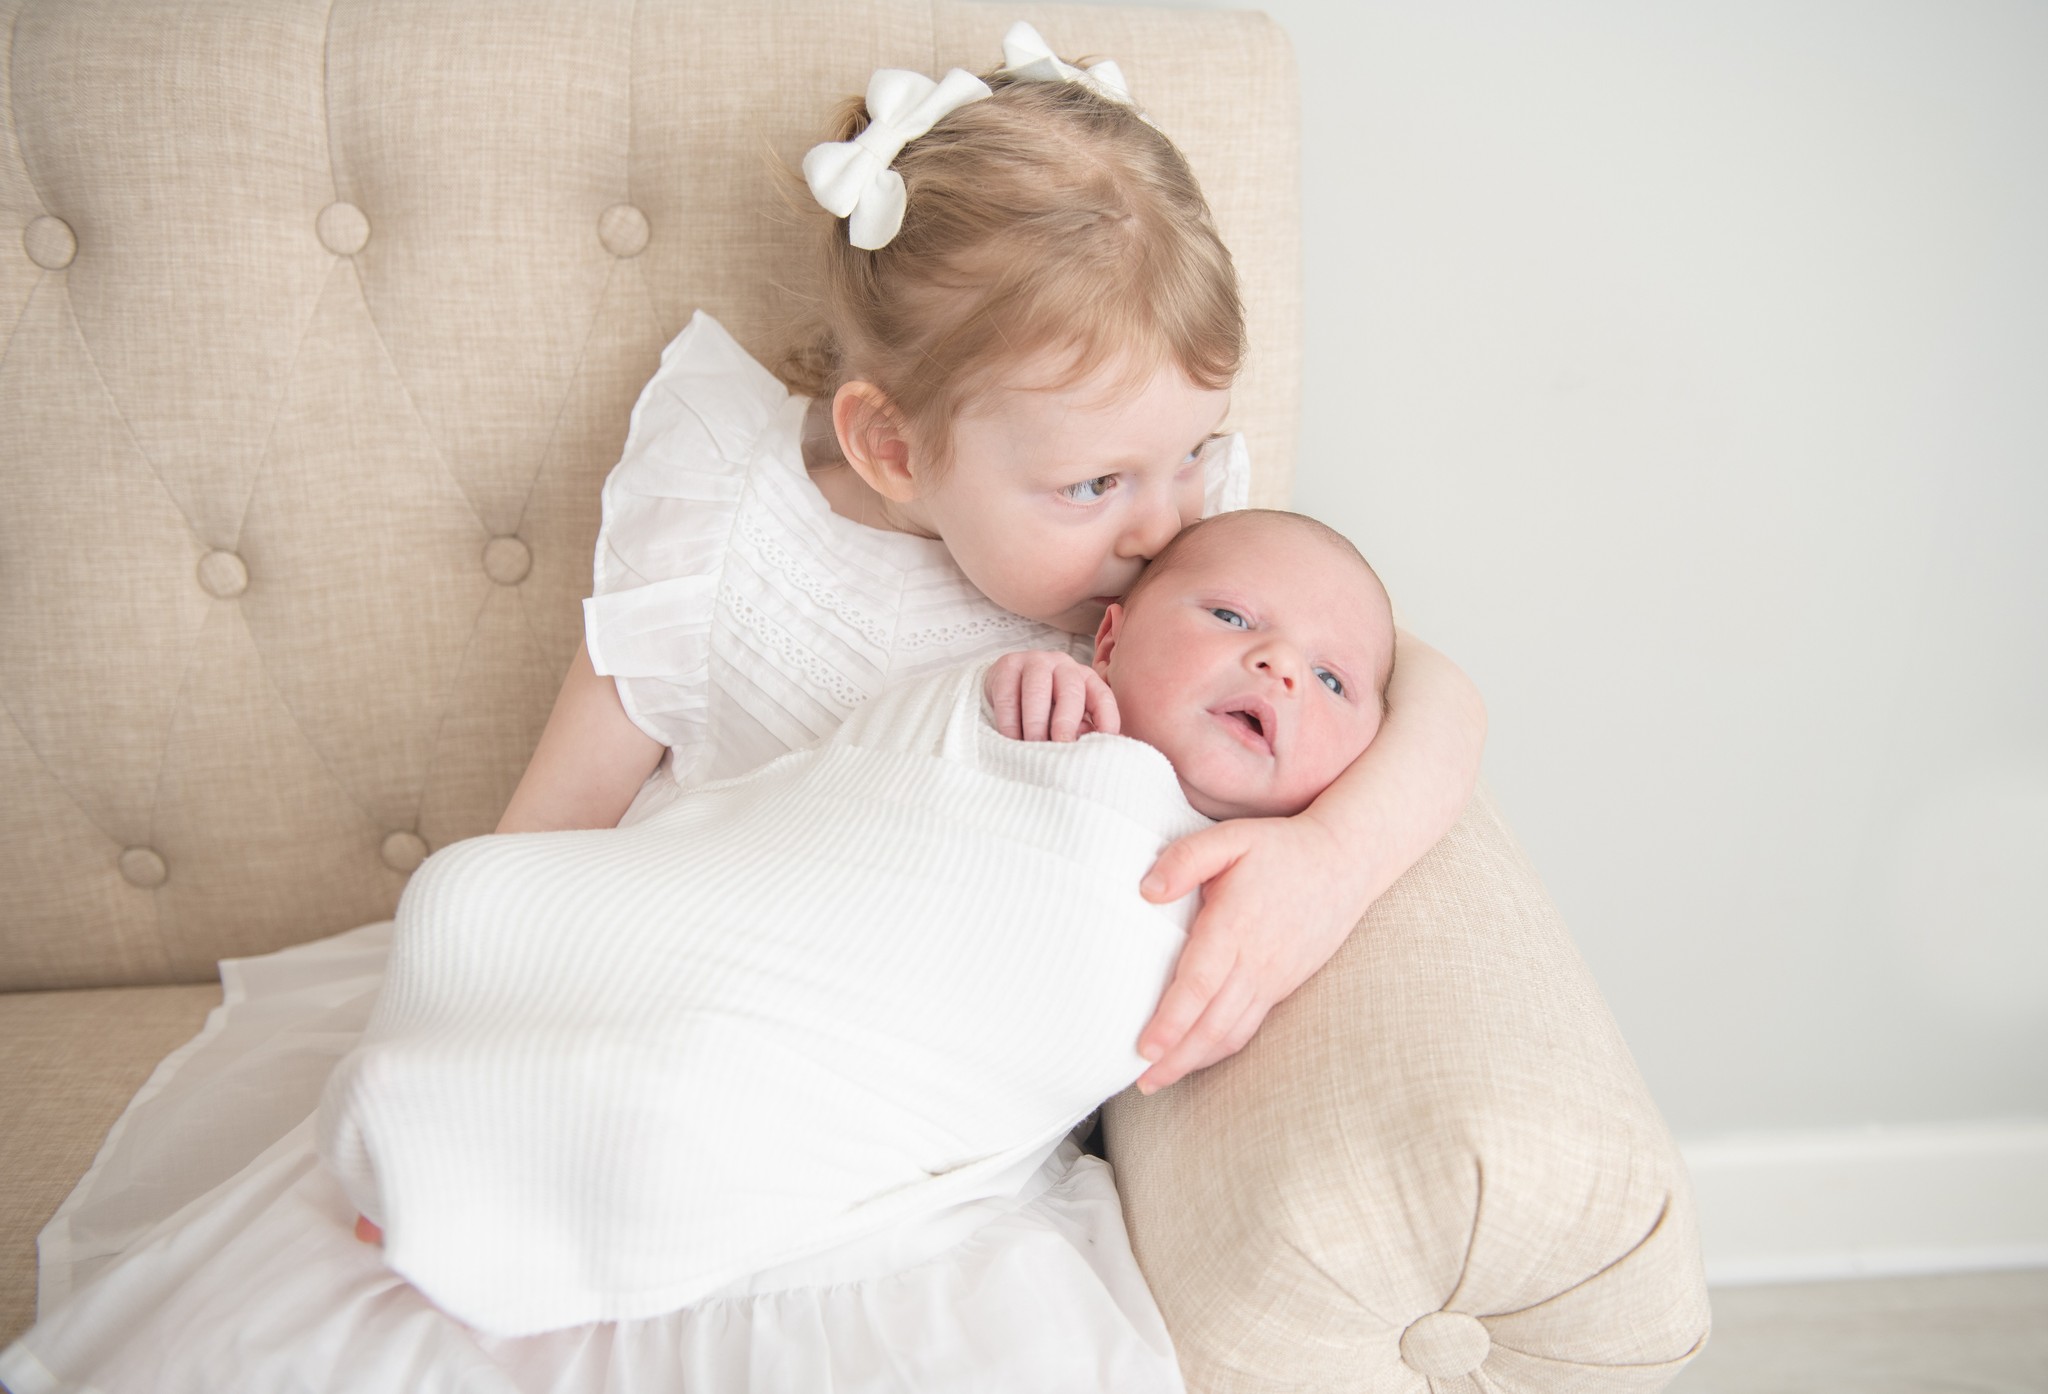 A young girl sits on a couch holding and kissing her newborn baby sibling the blue beret